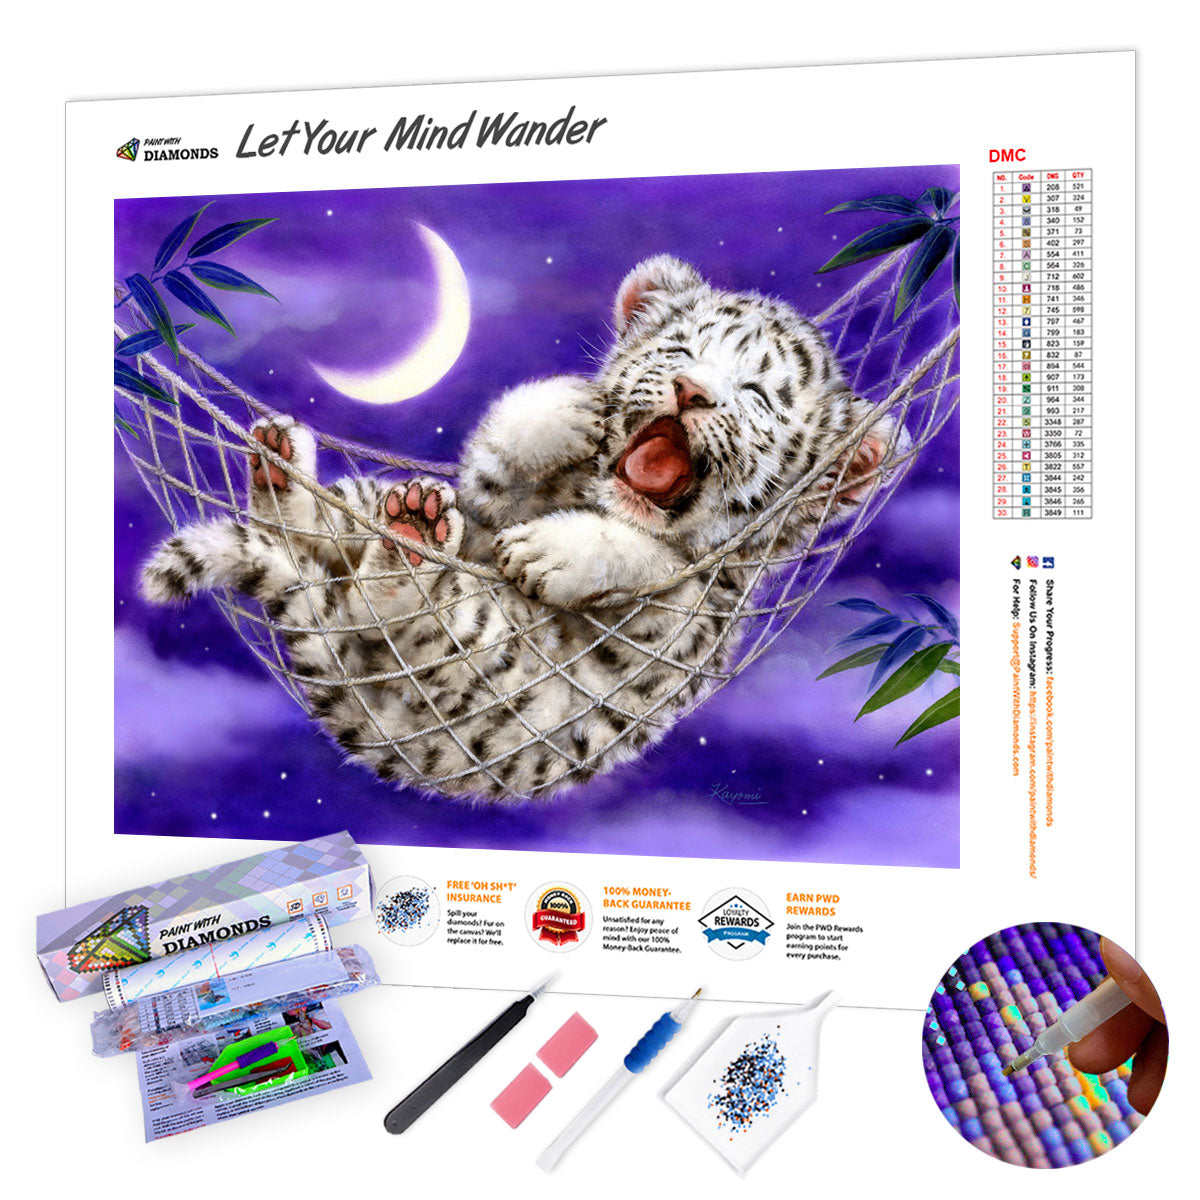 Fierce White Tiger Down Mountain Factory Cheapest Price 5D DIY Diamond  Painting Full Drill - China Diamond Painting and Diamond Art price